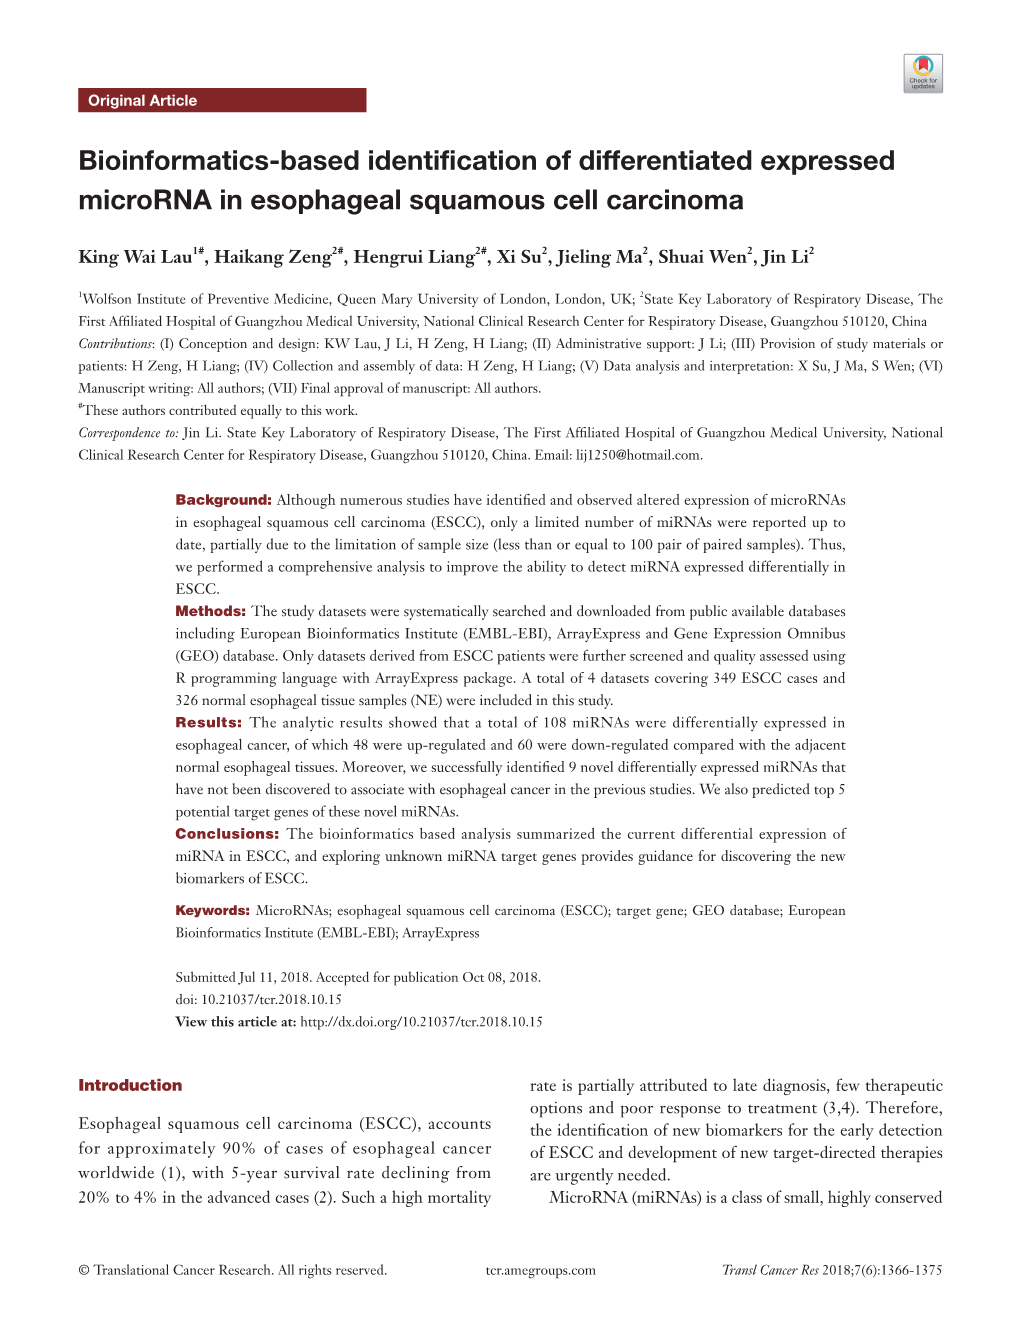 Bioinformatics-Based Identification of Differentiated Expressed Microrna in Esophageal Squamous Cell Carcinoma